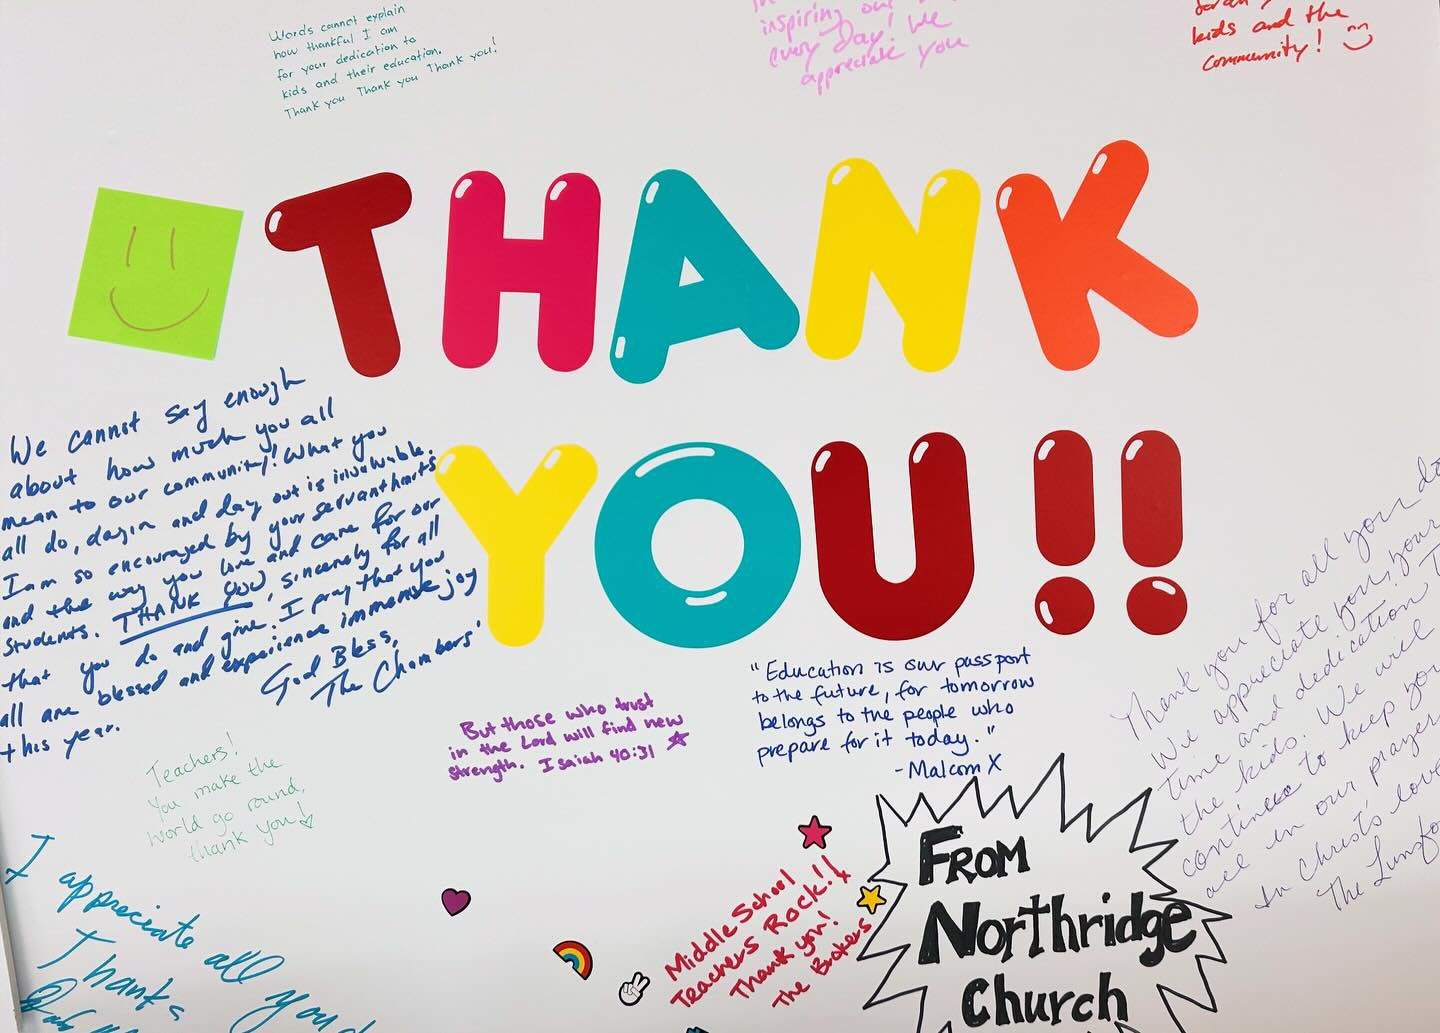 In honor of teacher appreciation week, THANK YOU! Today we recognize the teachers in the Northridge body and all over Anchorage for the wonderful work they do every day. It is amazing to see our children flourish with the love and care given in the c